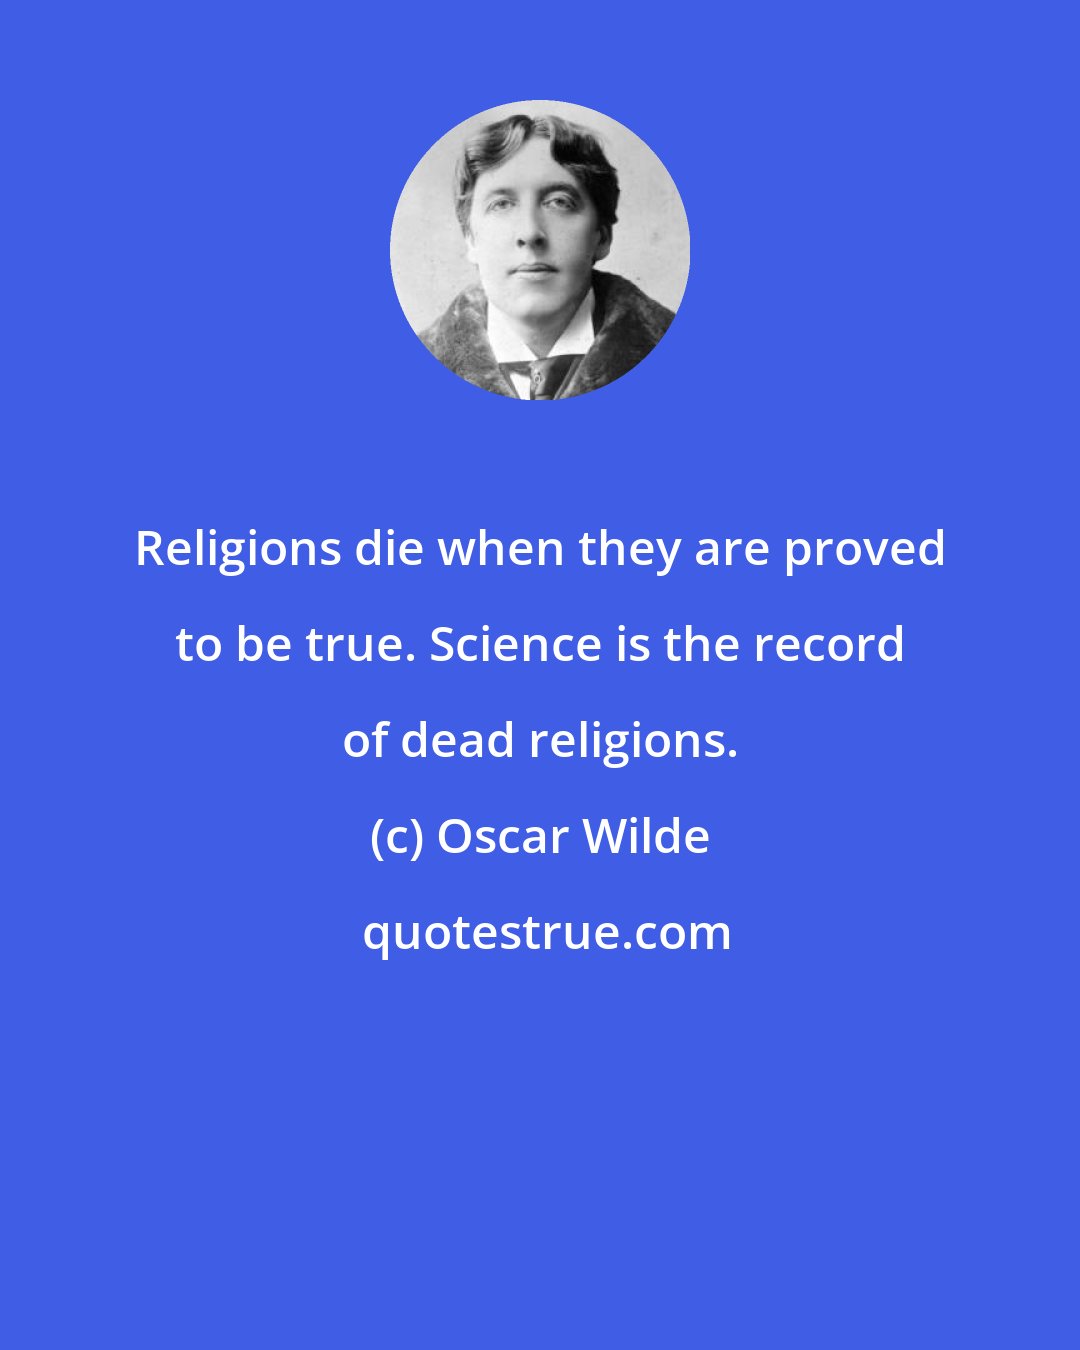 Oscar Wilde: Religions die when they are proved to be true. Science is the record of dead religions.